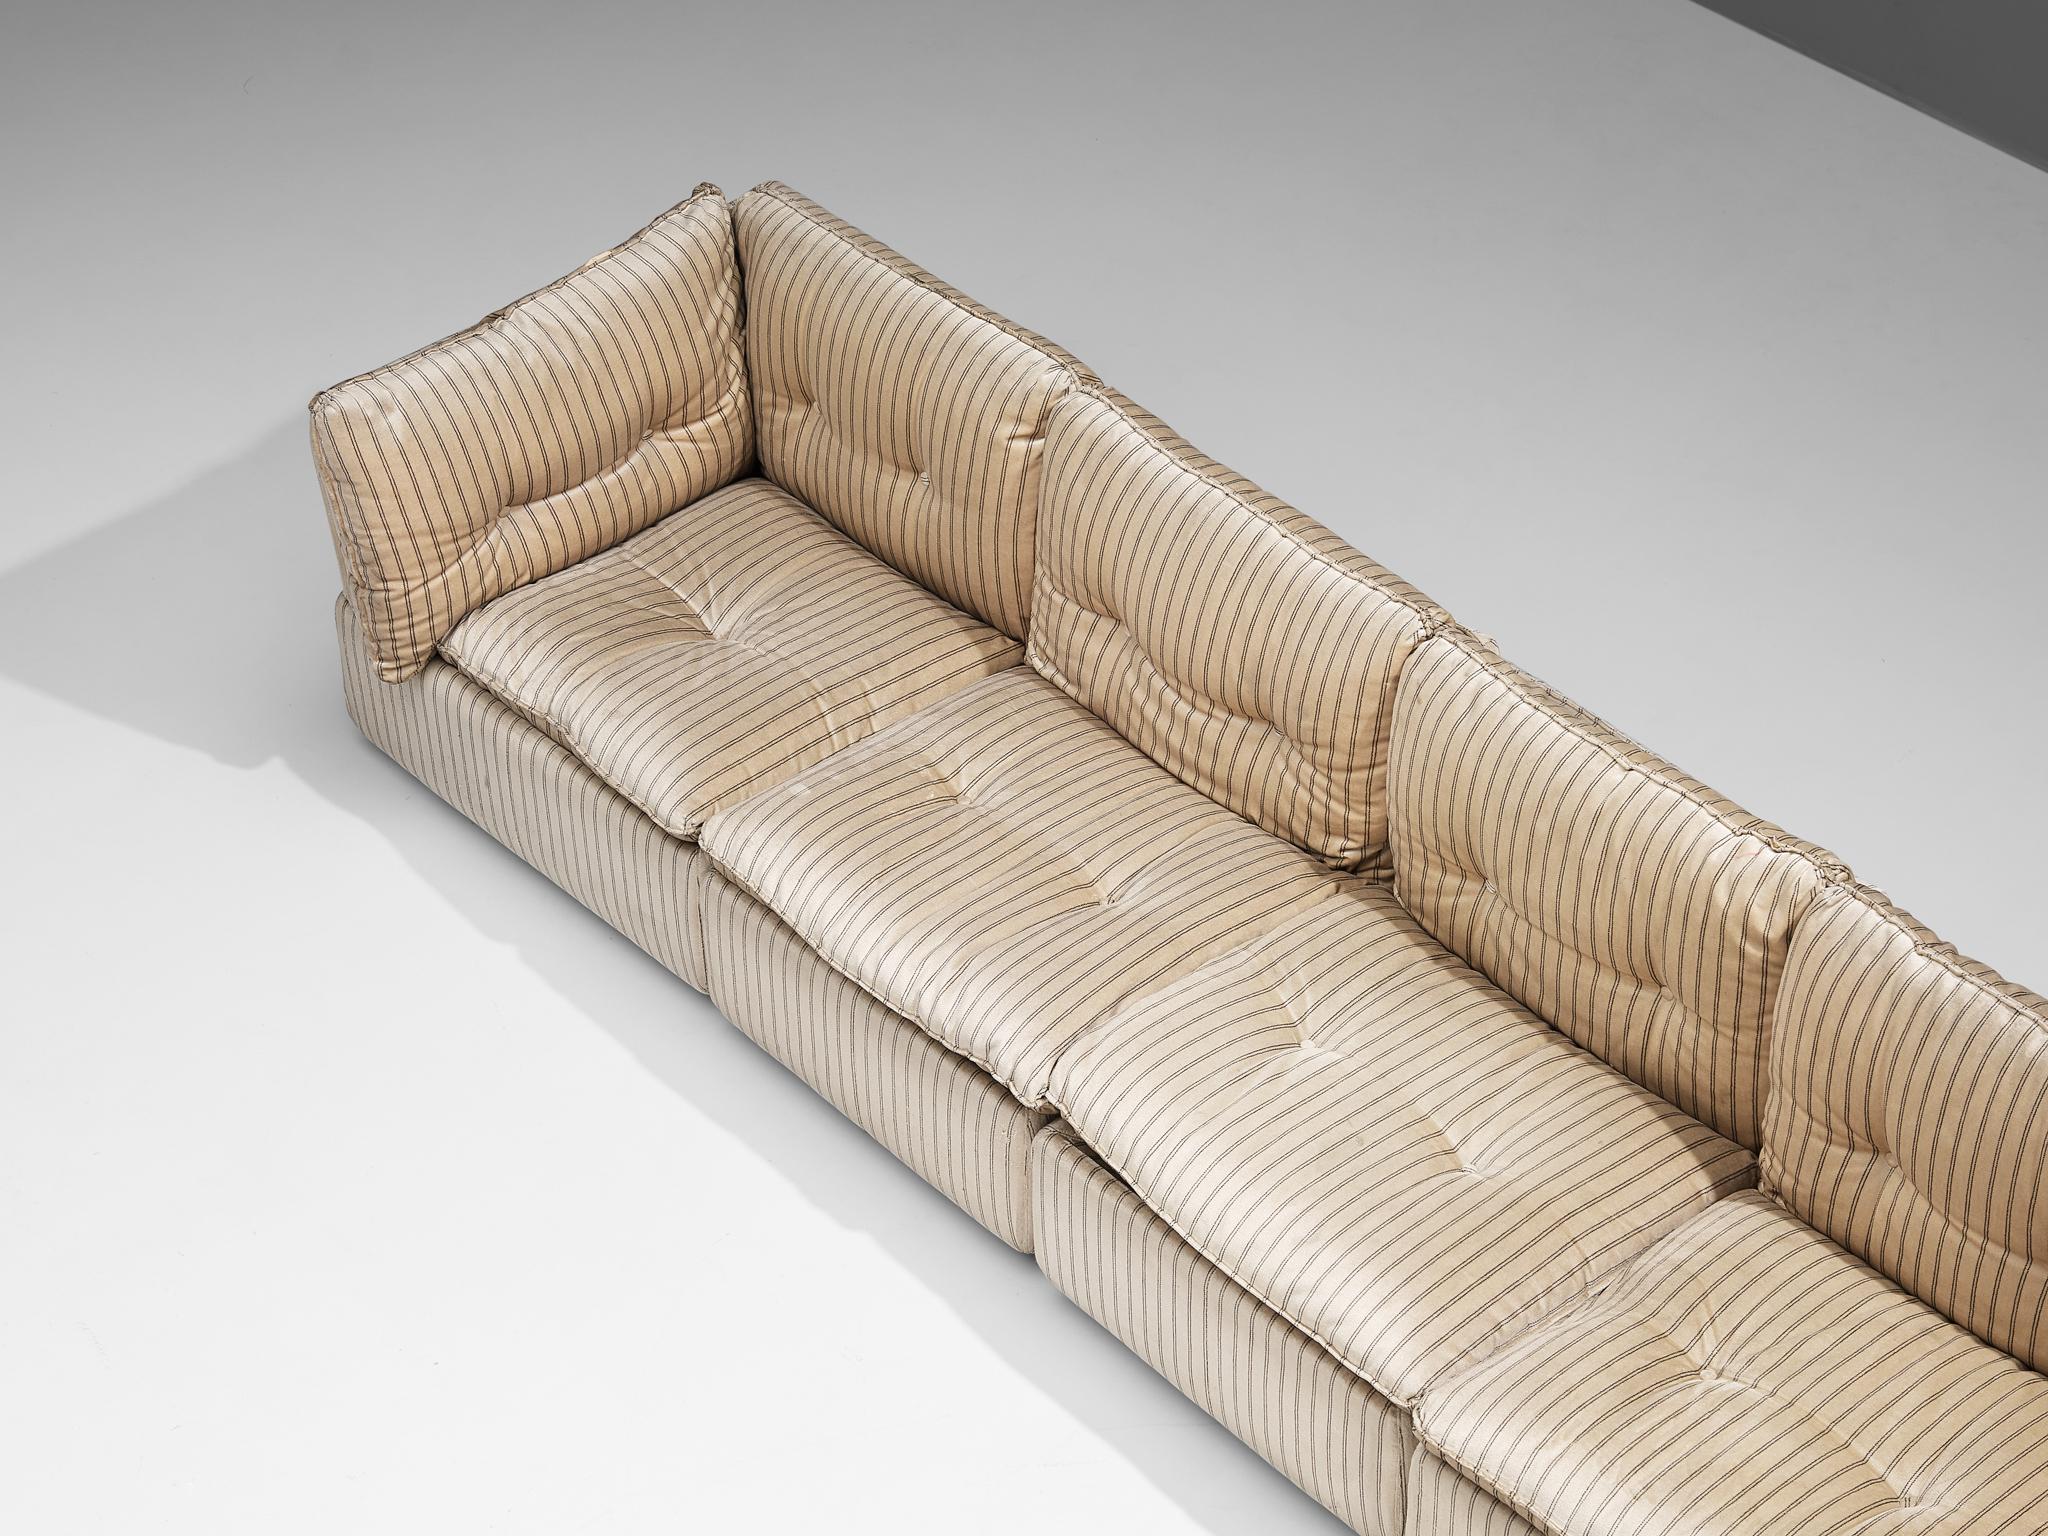 large sectional sofas